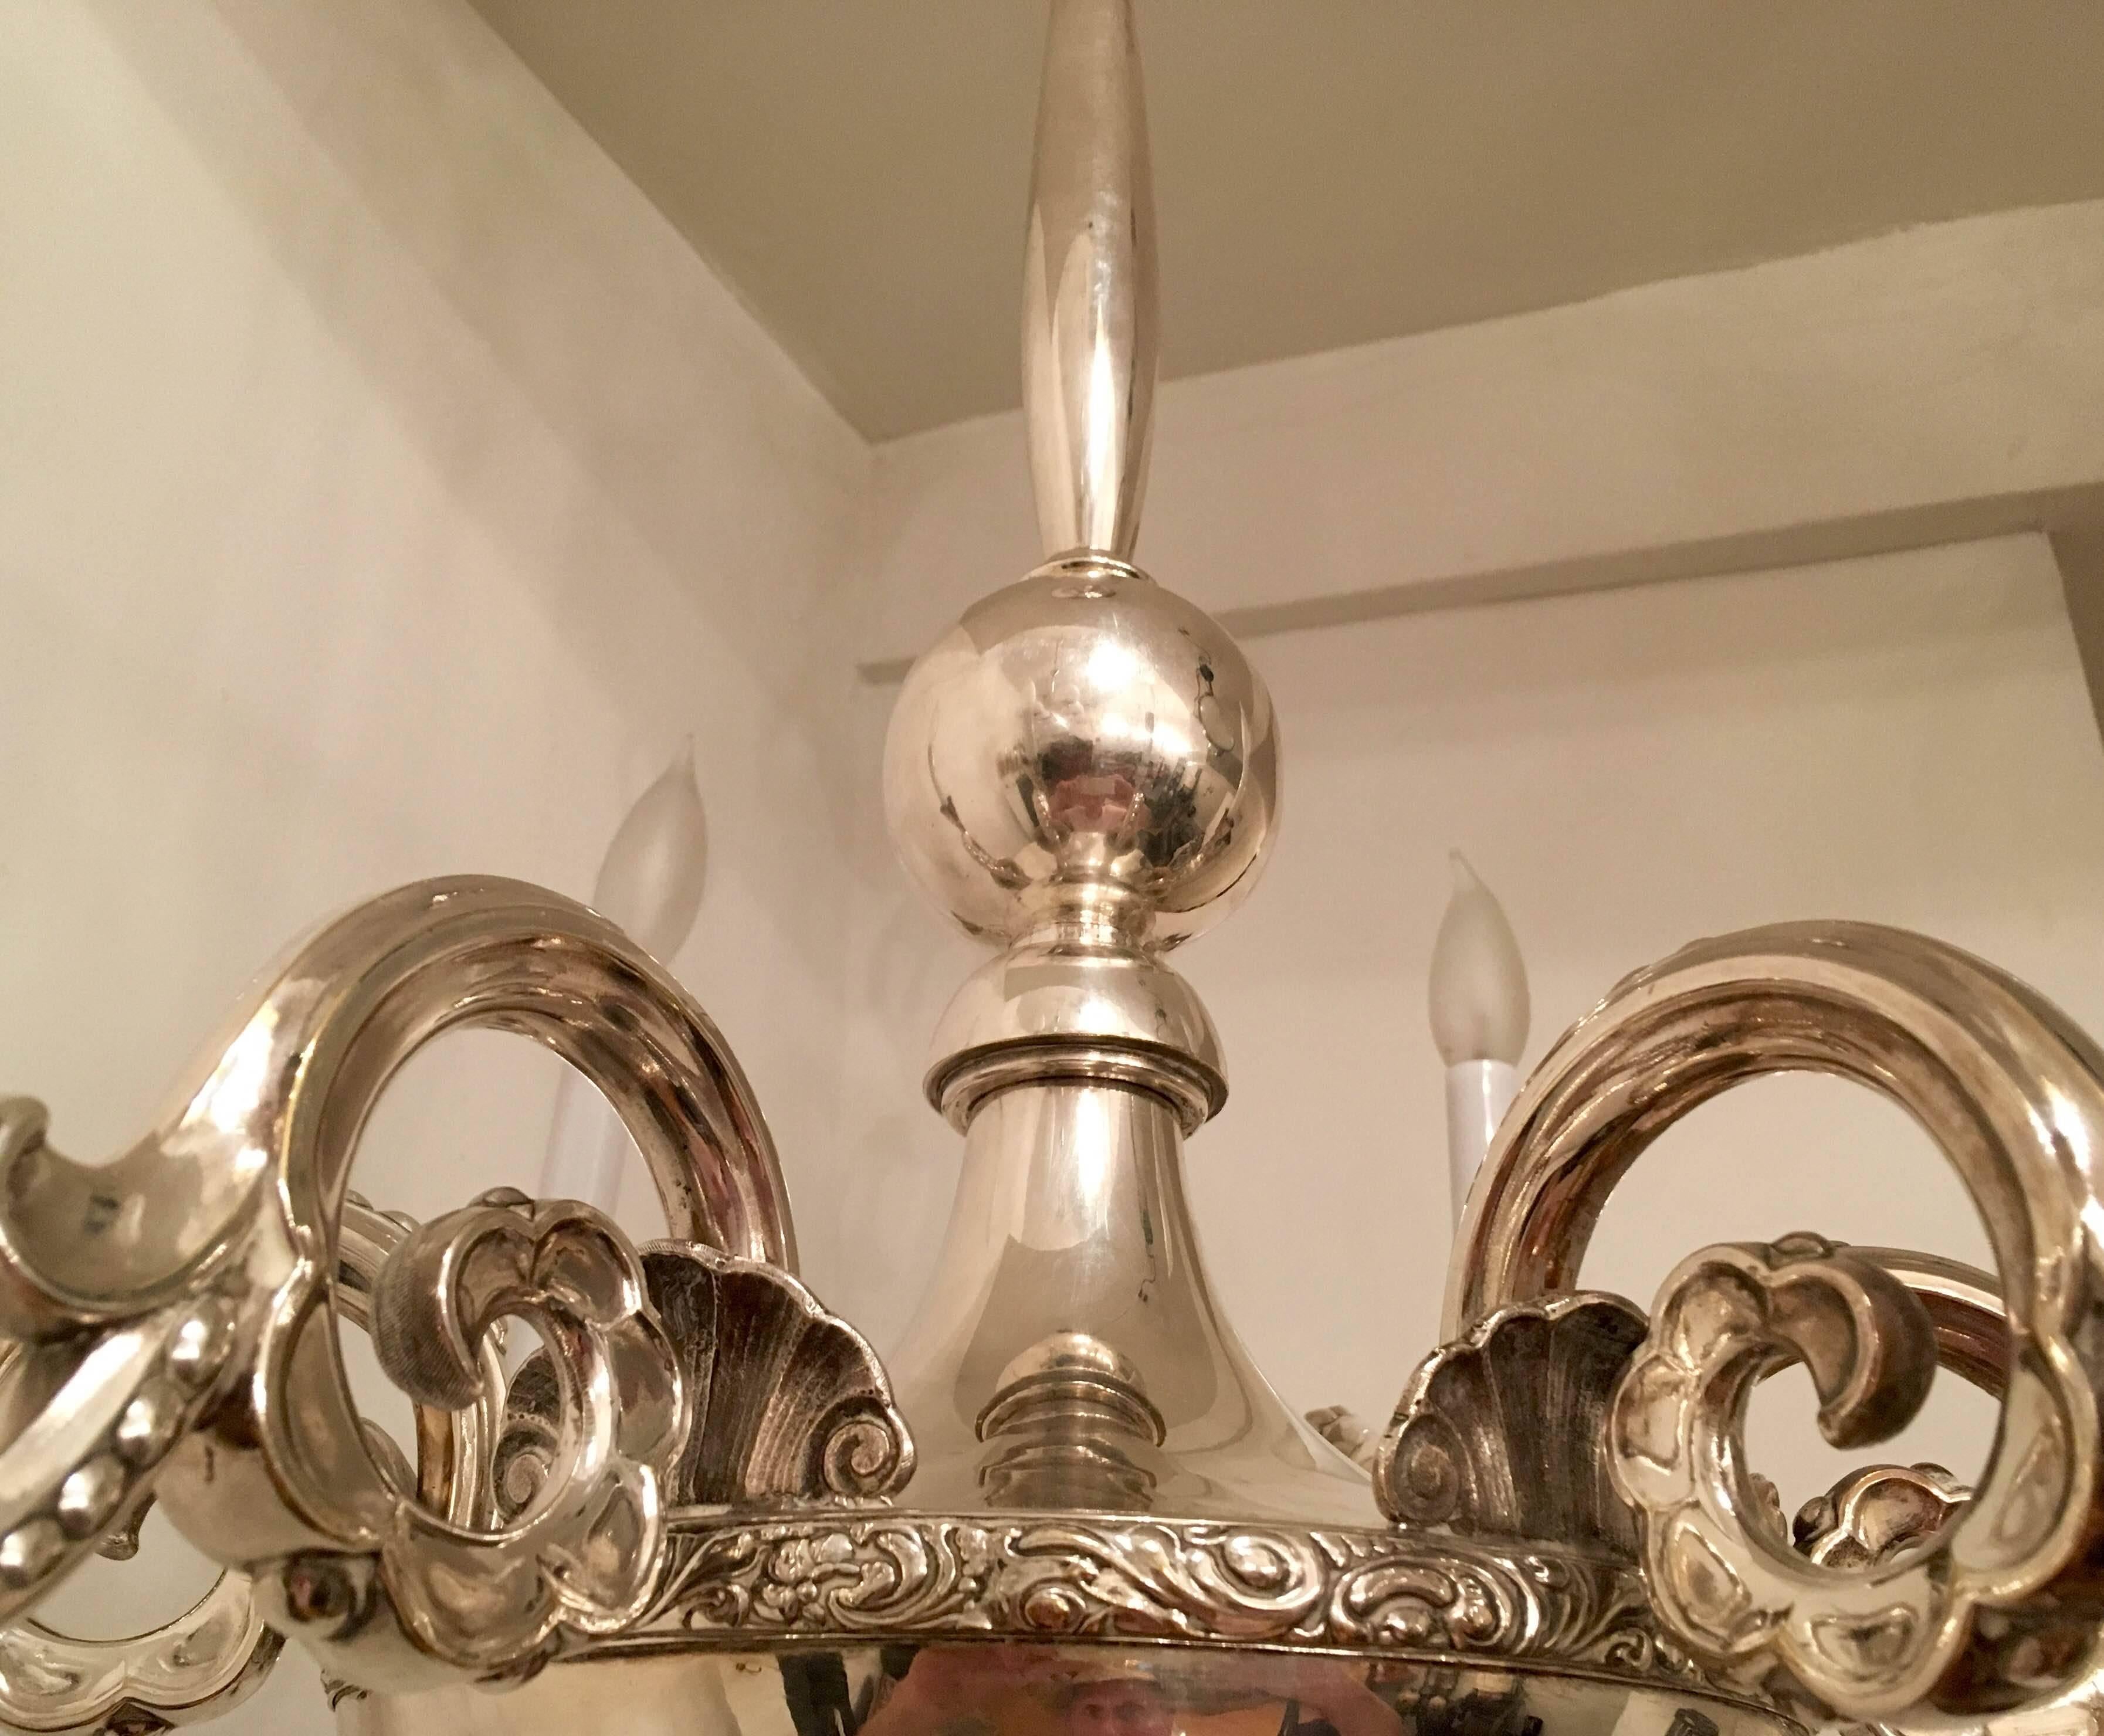 A wonderful original 1920s Grace period Swedish silver plated six arm chandelier designed by Elis Bergh for CG Hallberg. Newly rewired. Signed with makers marks. 